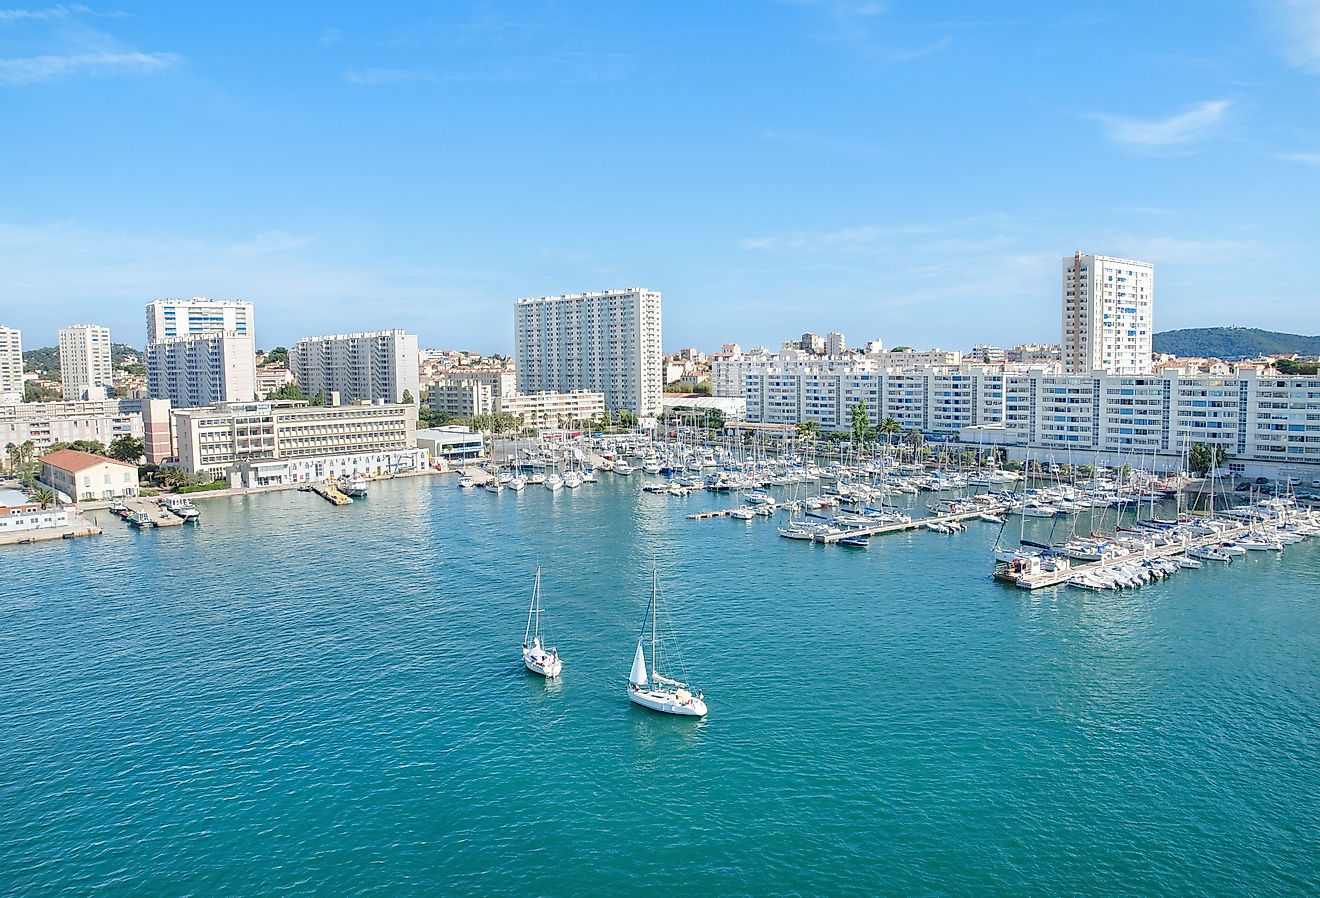 Toulon Harbor in France.: an important port on the Gulf of Lion. Image credit David Herraez Calzada via Shutterstock.